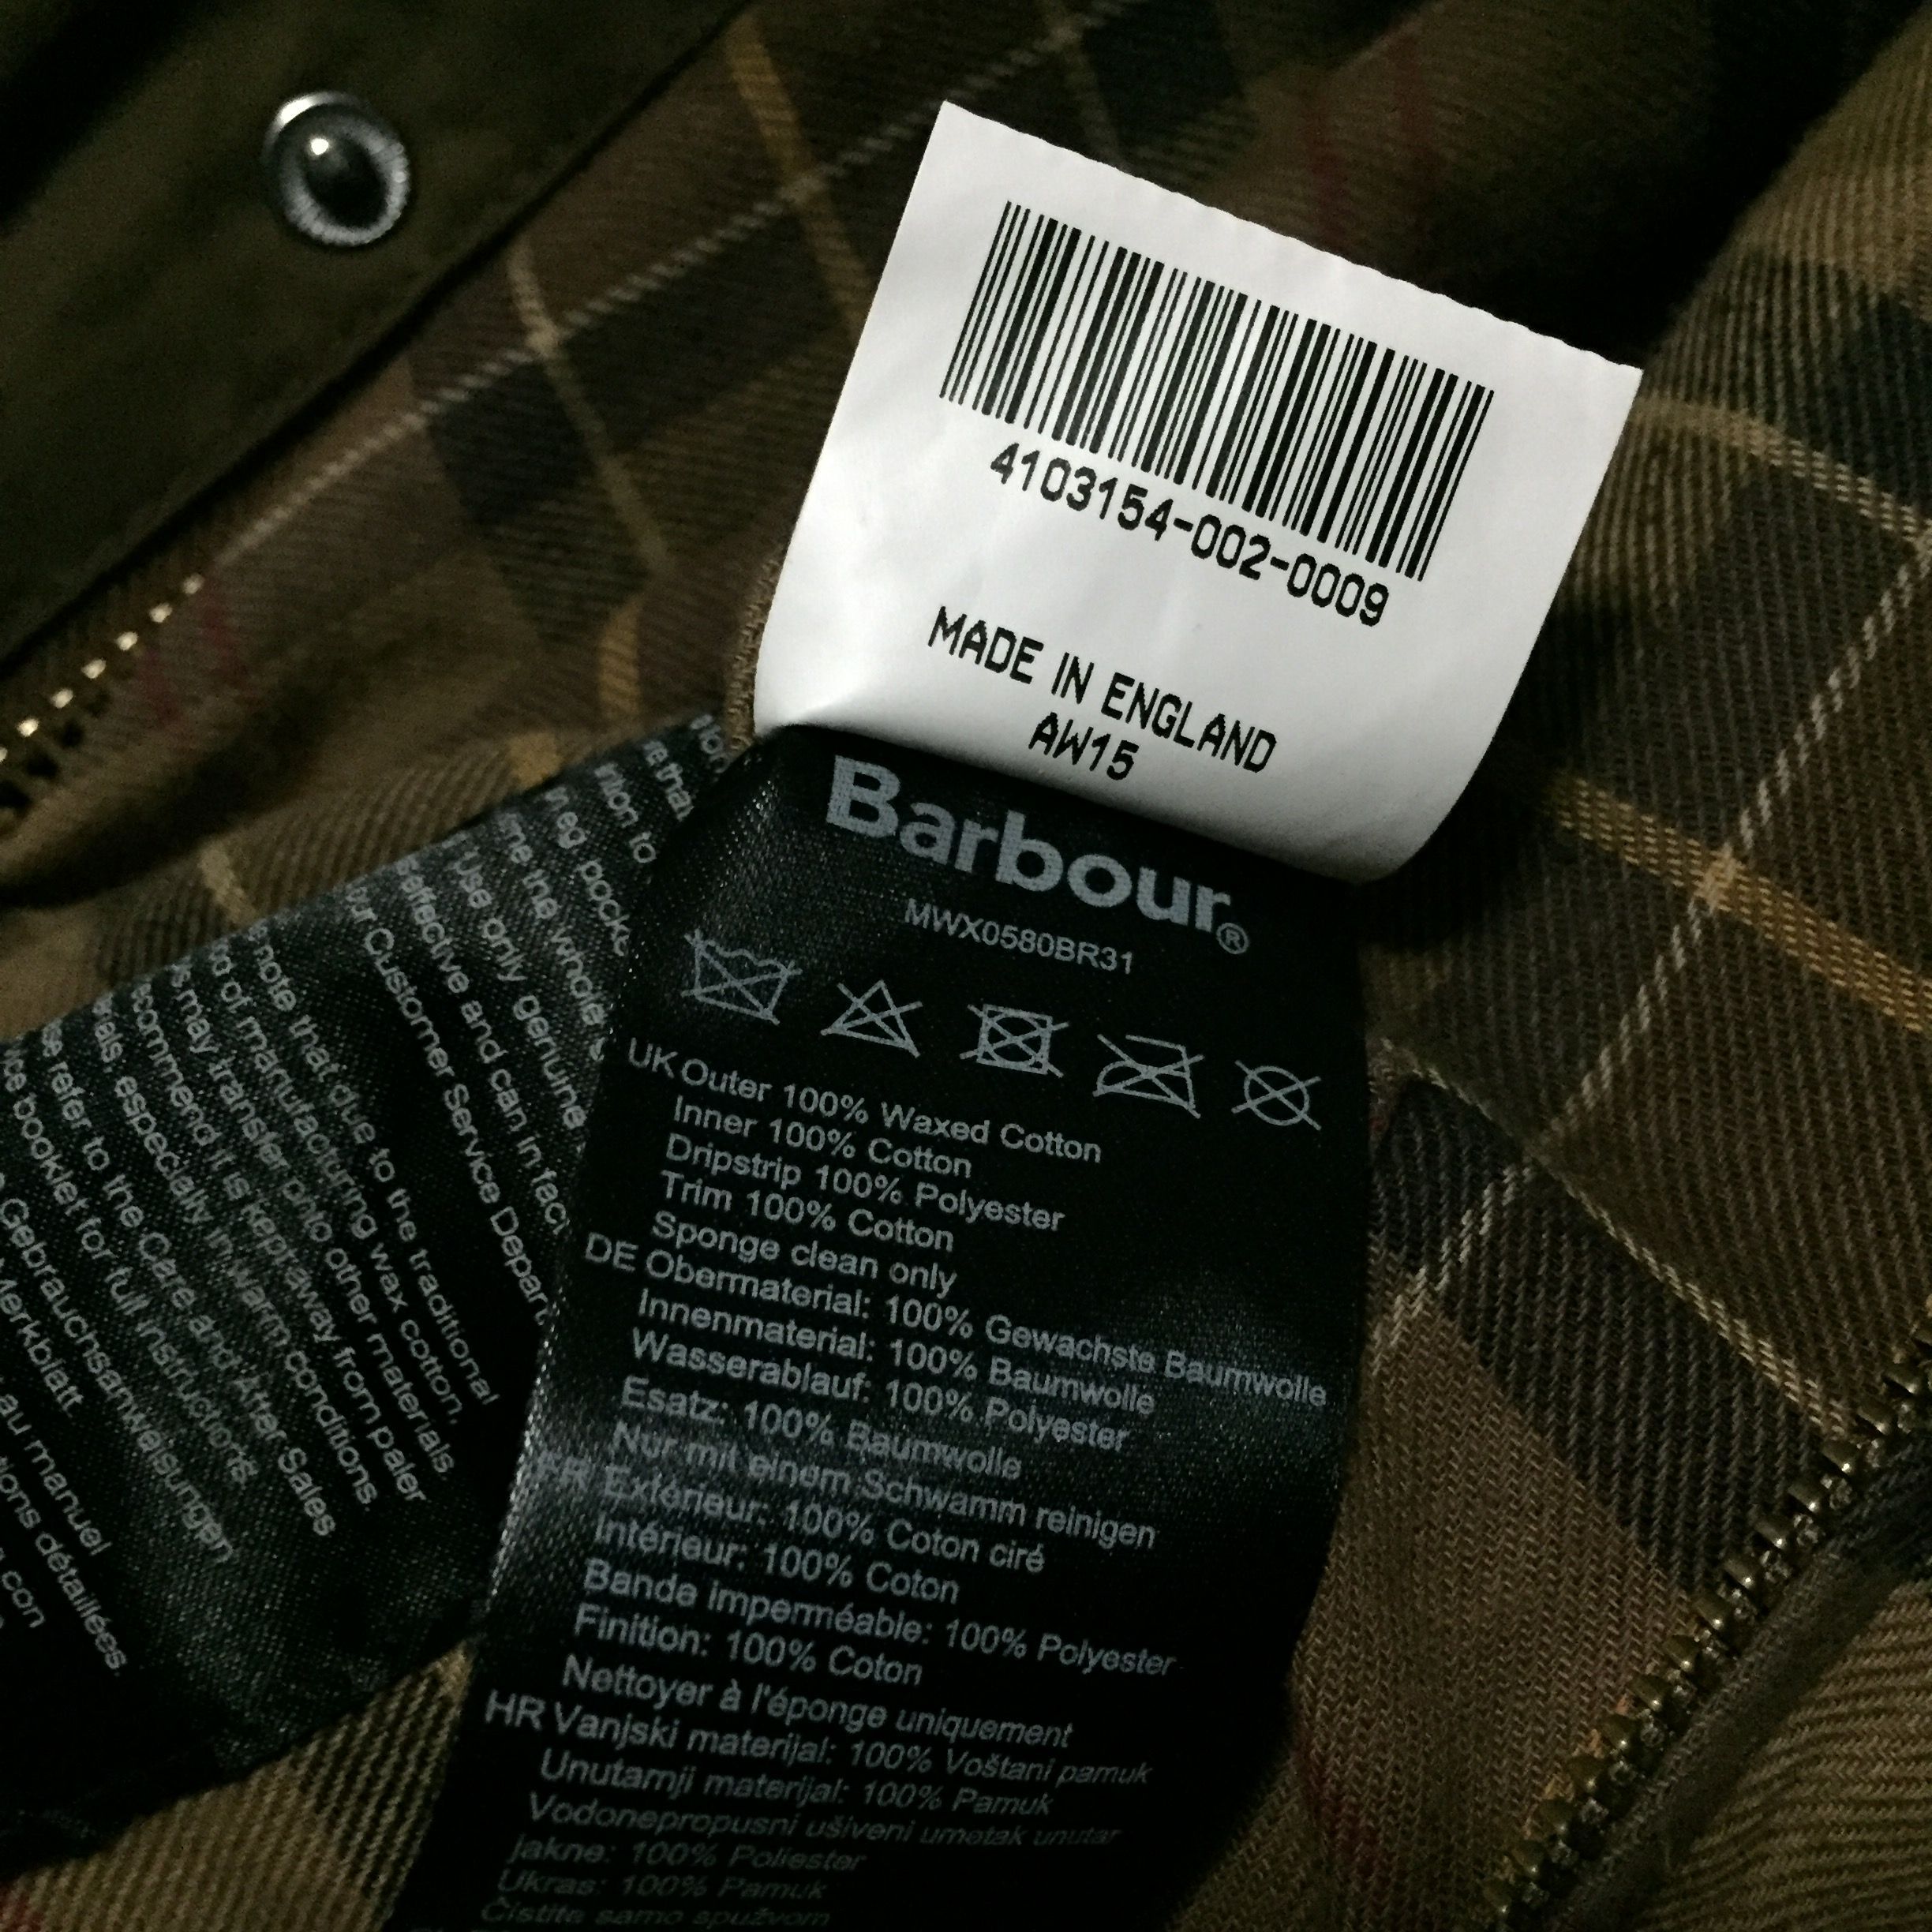 barbour care instructions